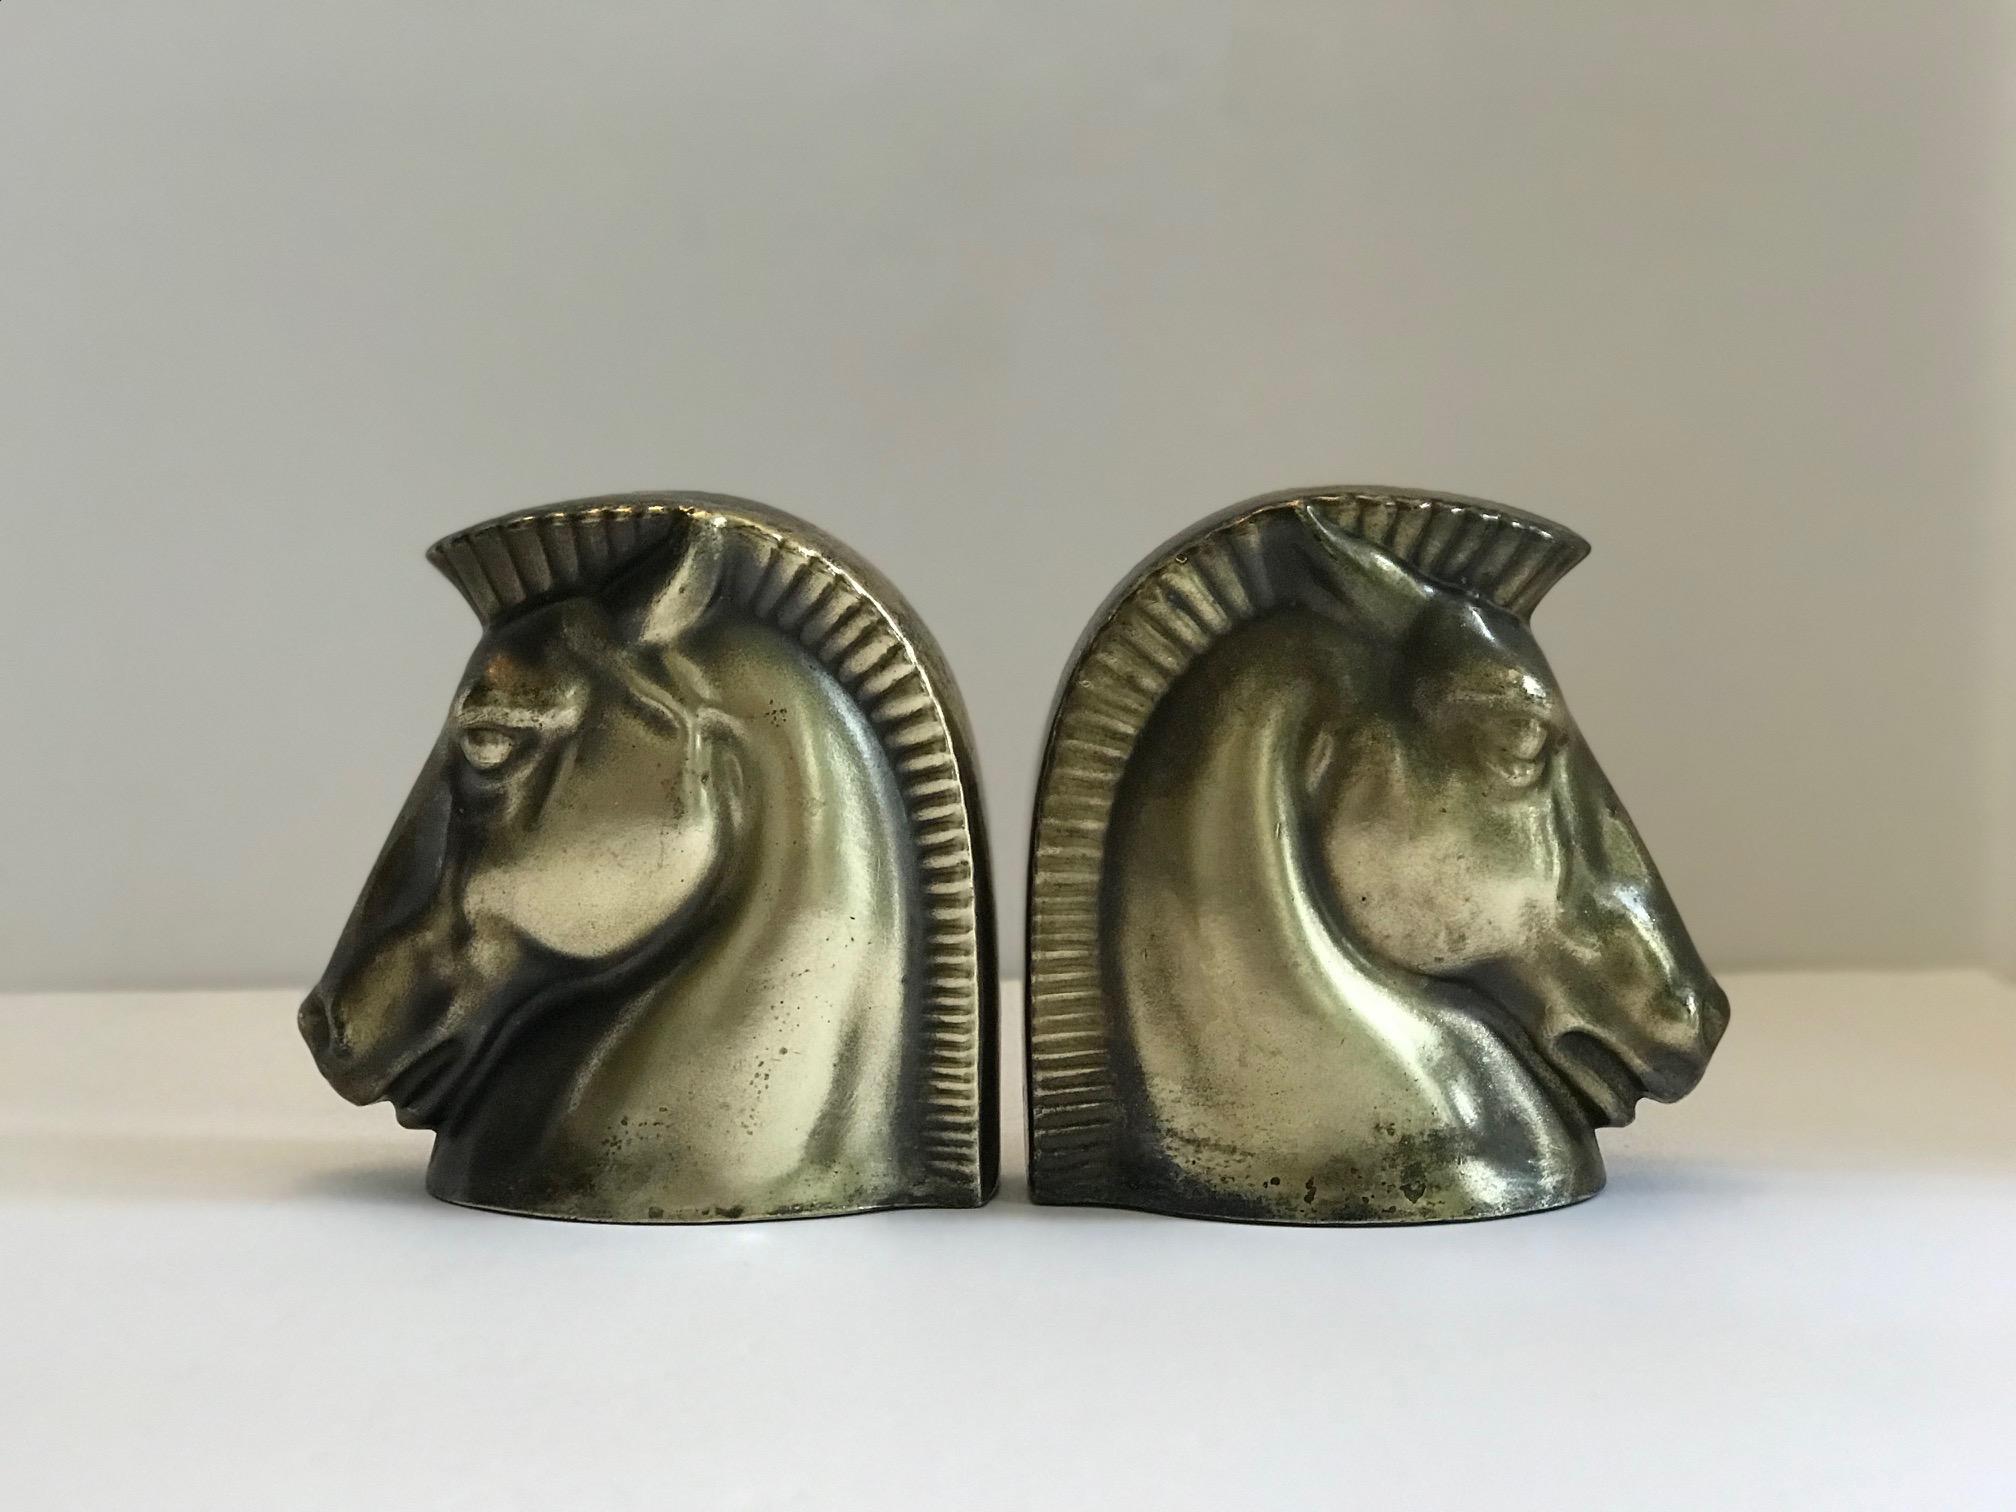 Metal Pair of Art Deco Brass Plated Trojan Horse Bookends by Frankart